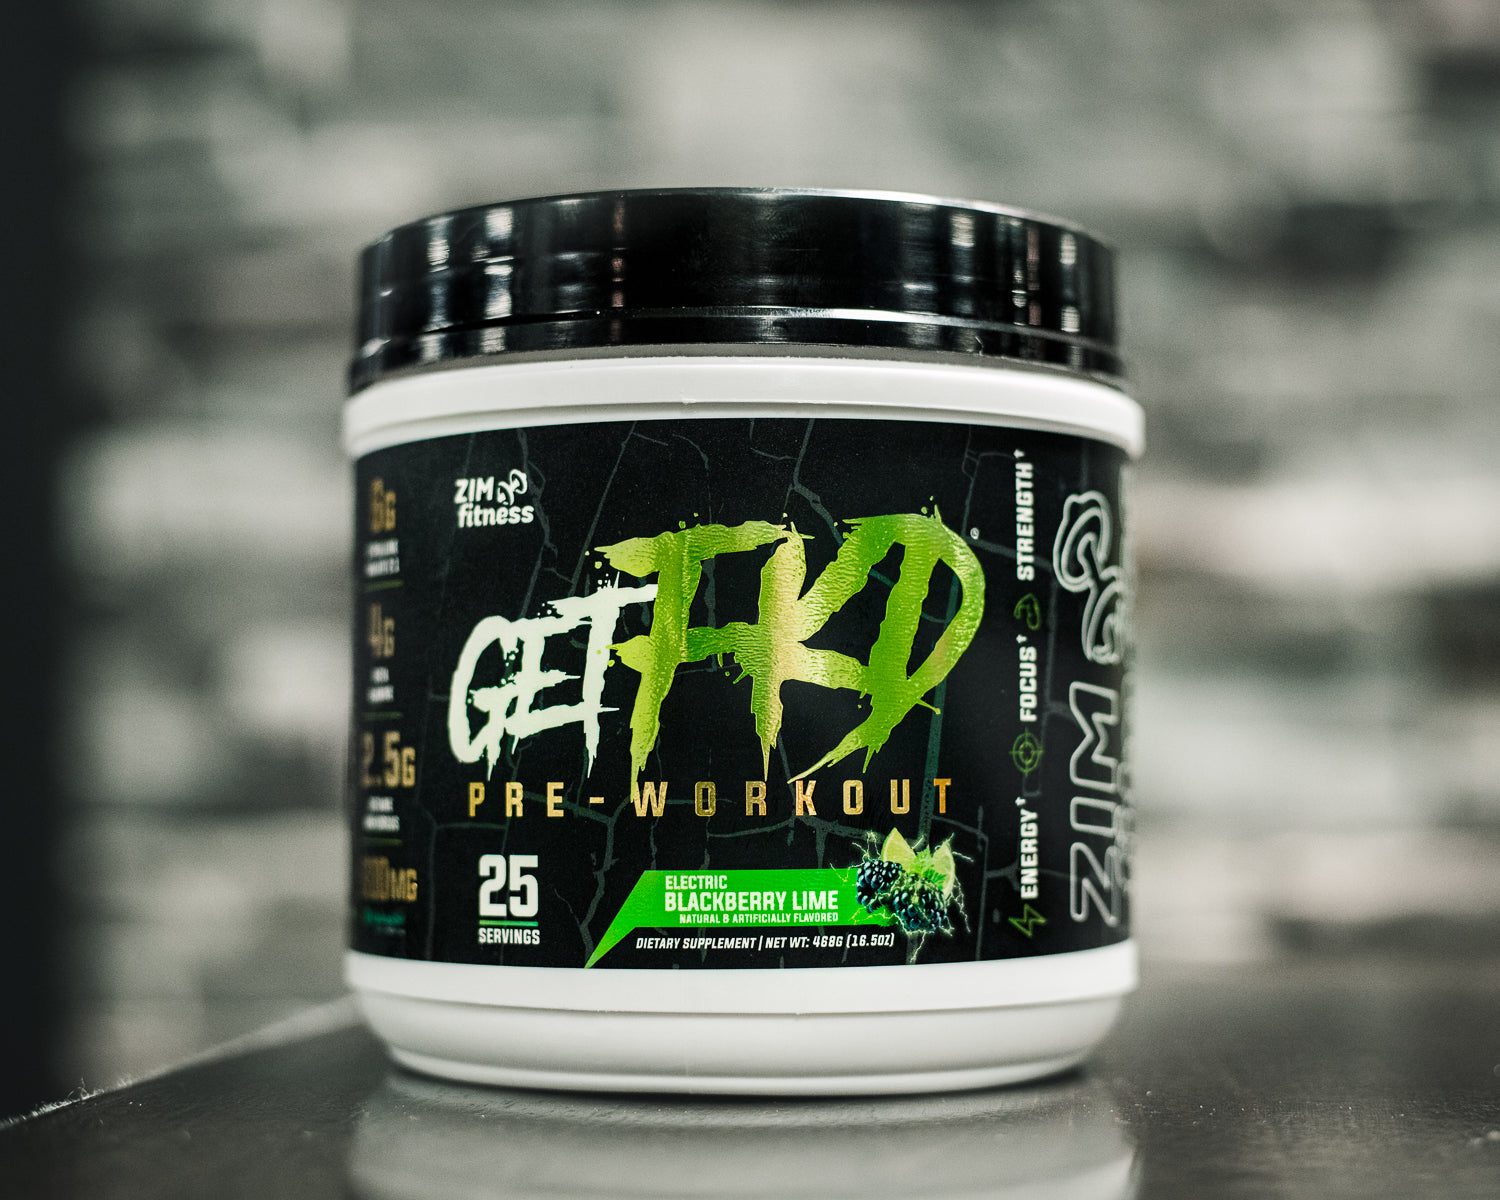 GET FKD Pre-Workout Supplement Releases Newest Flavor: Electric Blackberry Lime